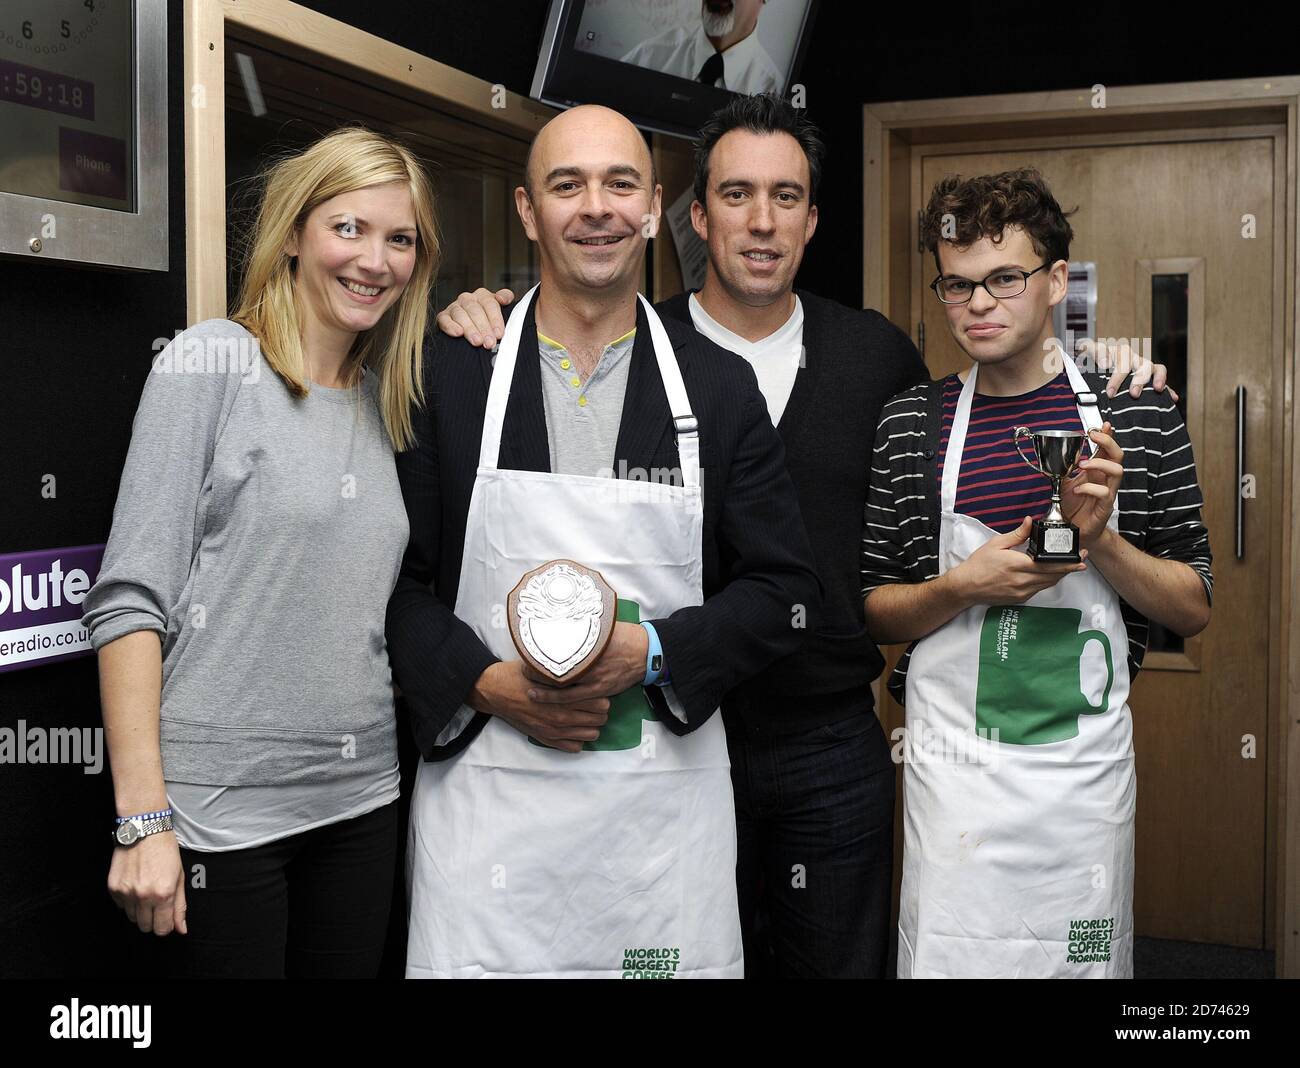 (l-r) Judge Lisa Faulkner, runner-up Philip Newton, Christian O'Connell and winner Luke Boatright pictured during the 'man bake' competition on Christian O'Connell's breakfast show, at the Absolute Radio studios in central London.  Stock Photo